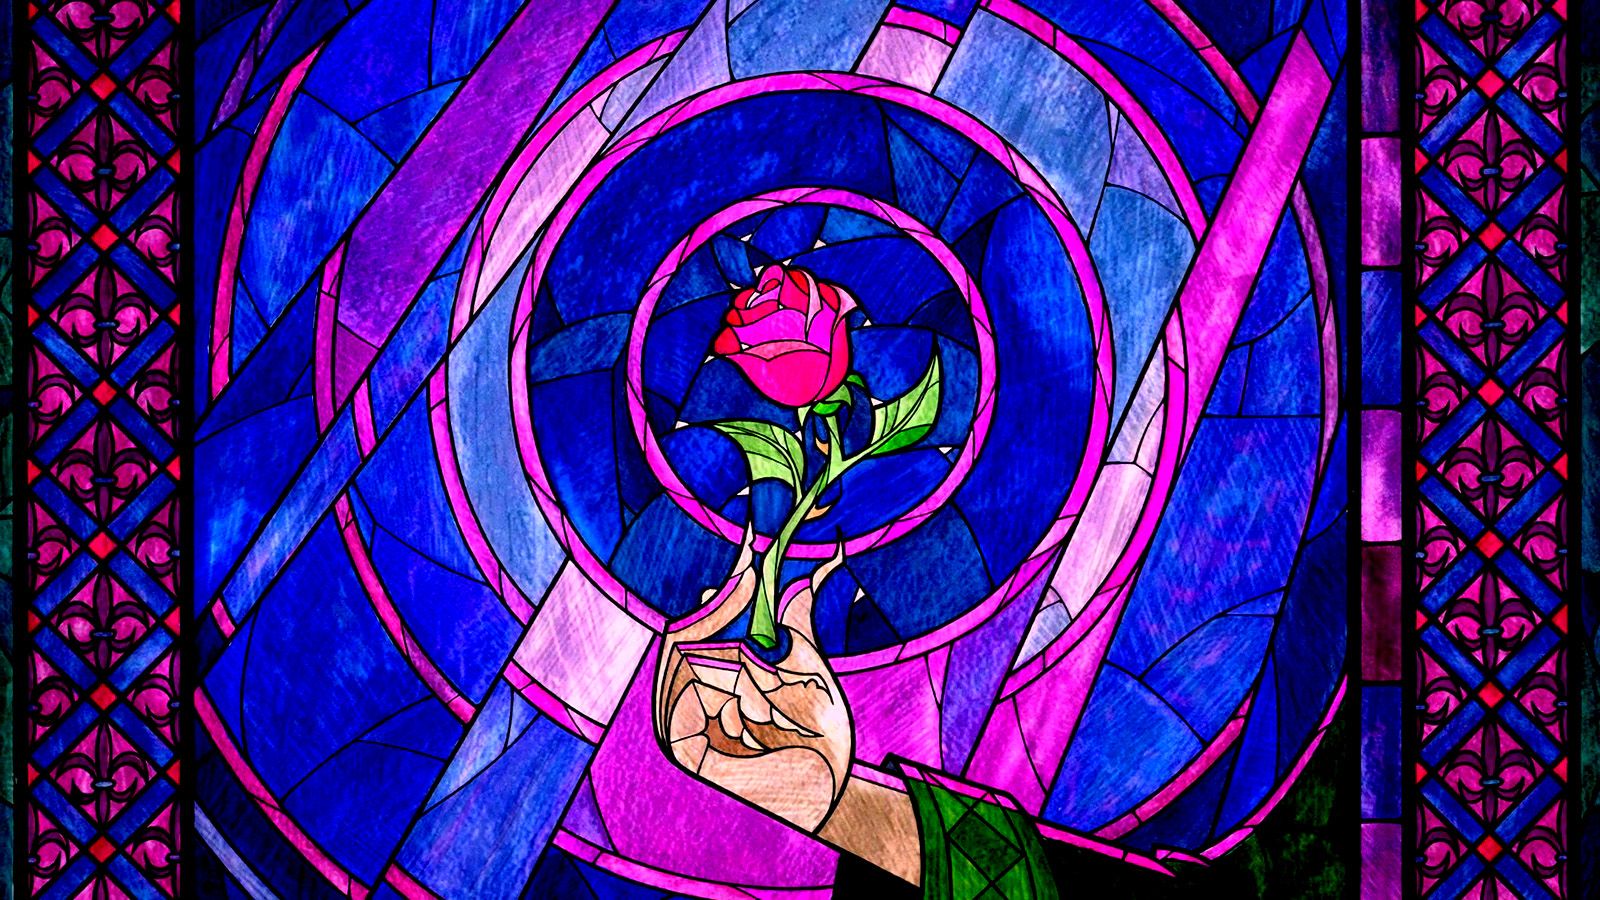 Beauty and the Beast Wallpaper: Stained Glass Wallpaper. Beauty and the beast wallpaper, Beast wallpaper, Beauty and the beast